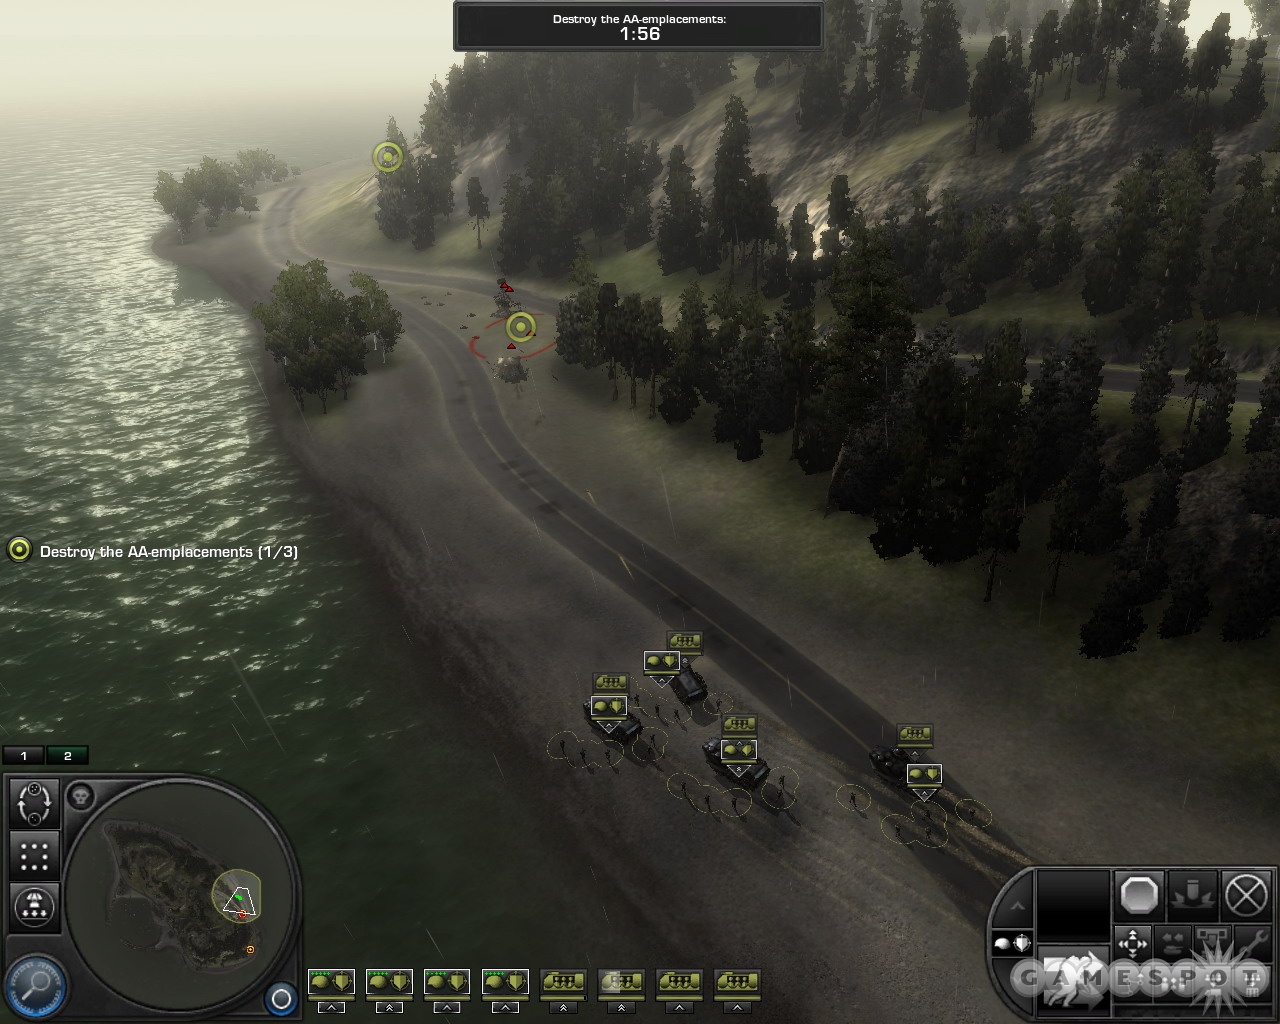 Use your infantry here to destroy the anti-tank fortifications. You don't want to lose any of your APCs here.